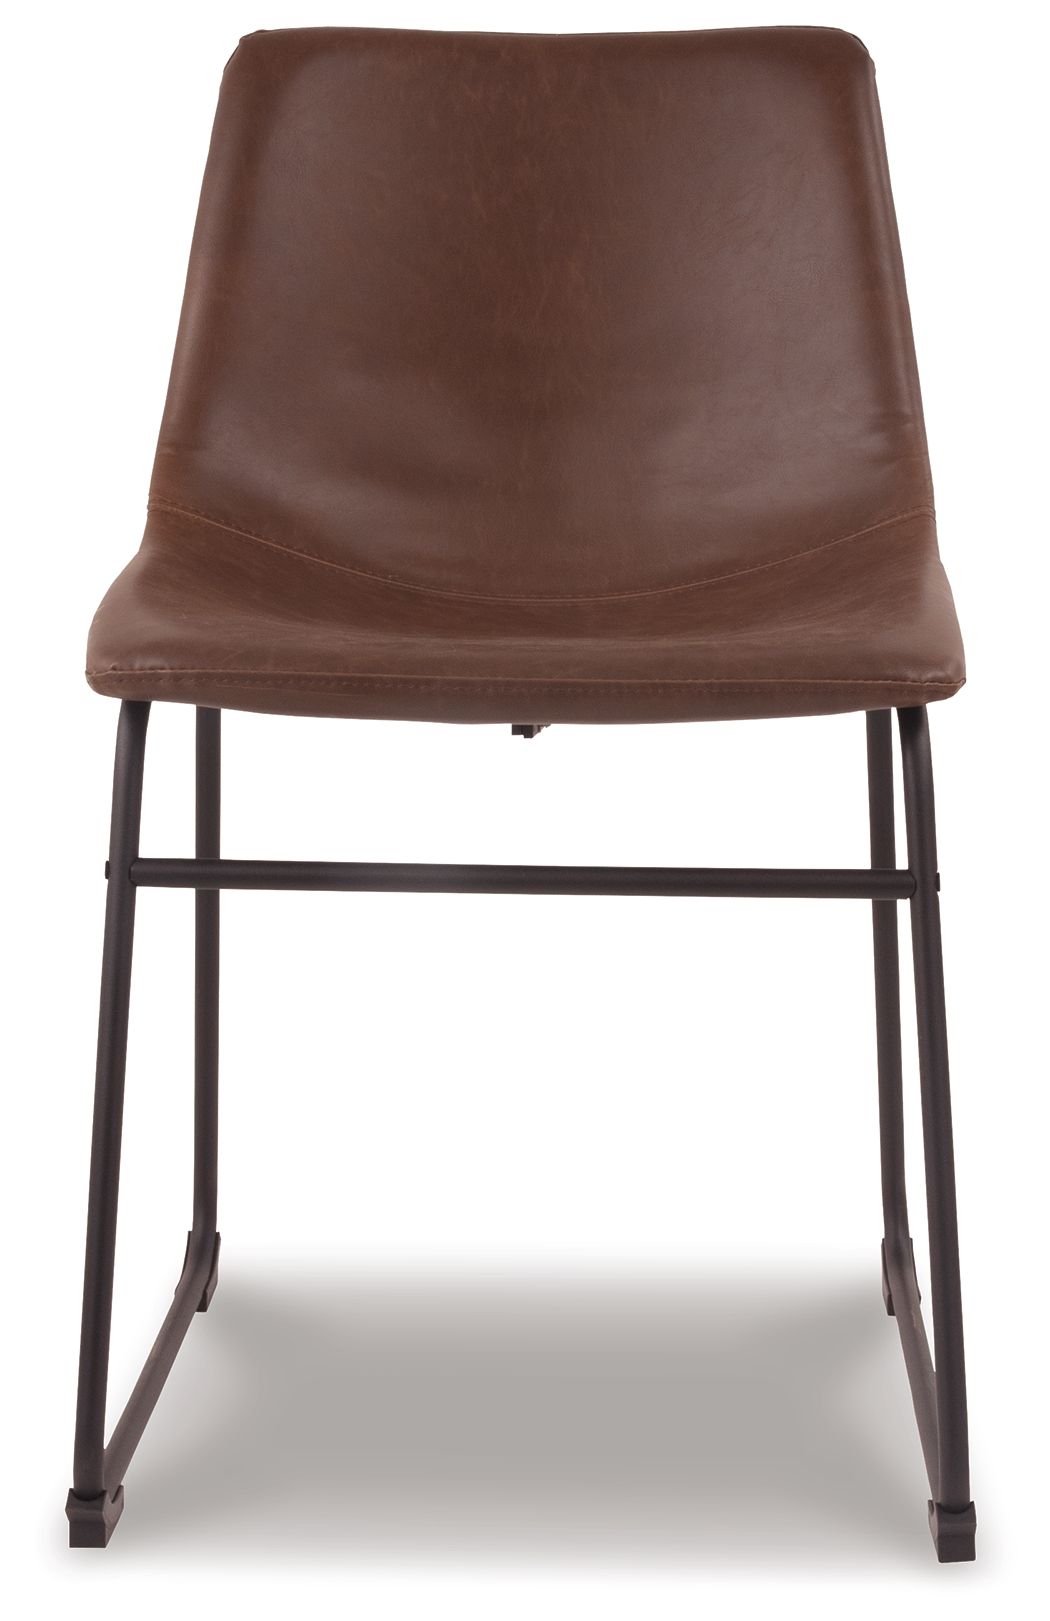 Centiar - Upholstered Side Chair - Tony's Home Furnishings